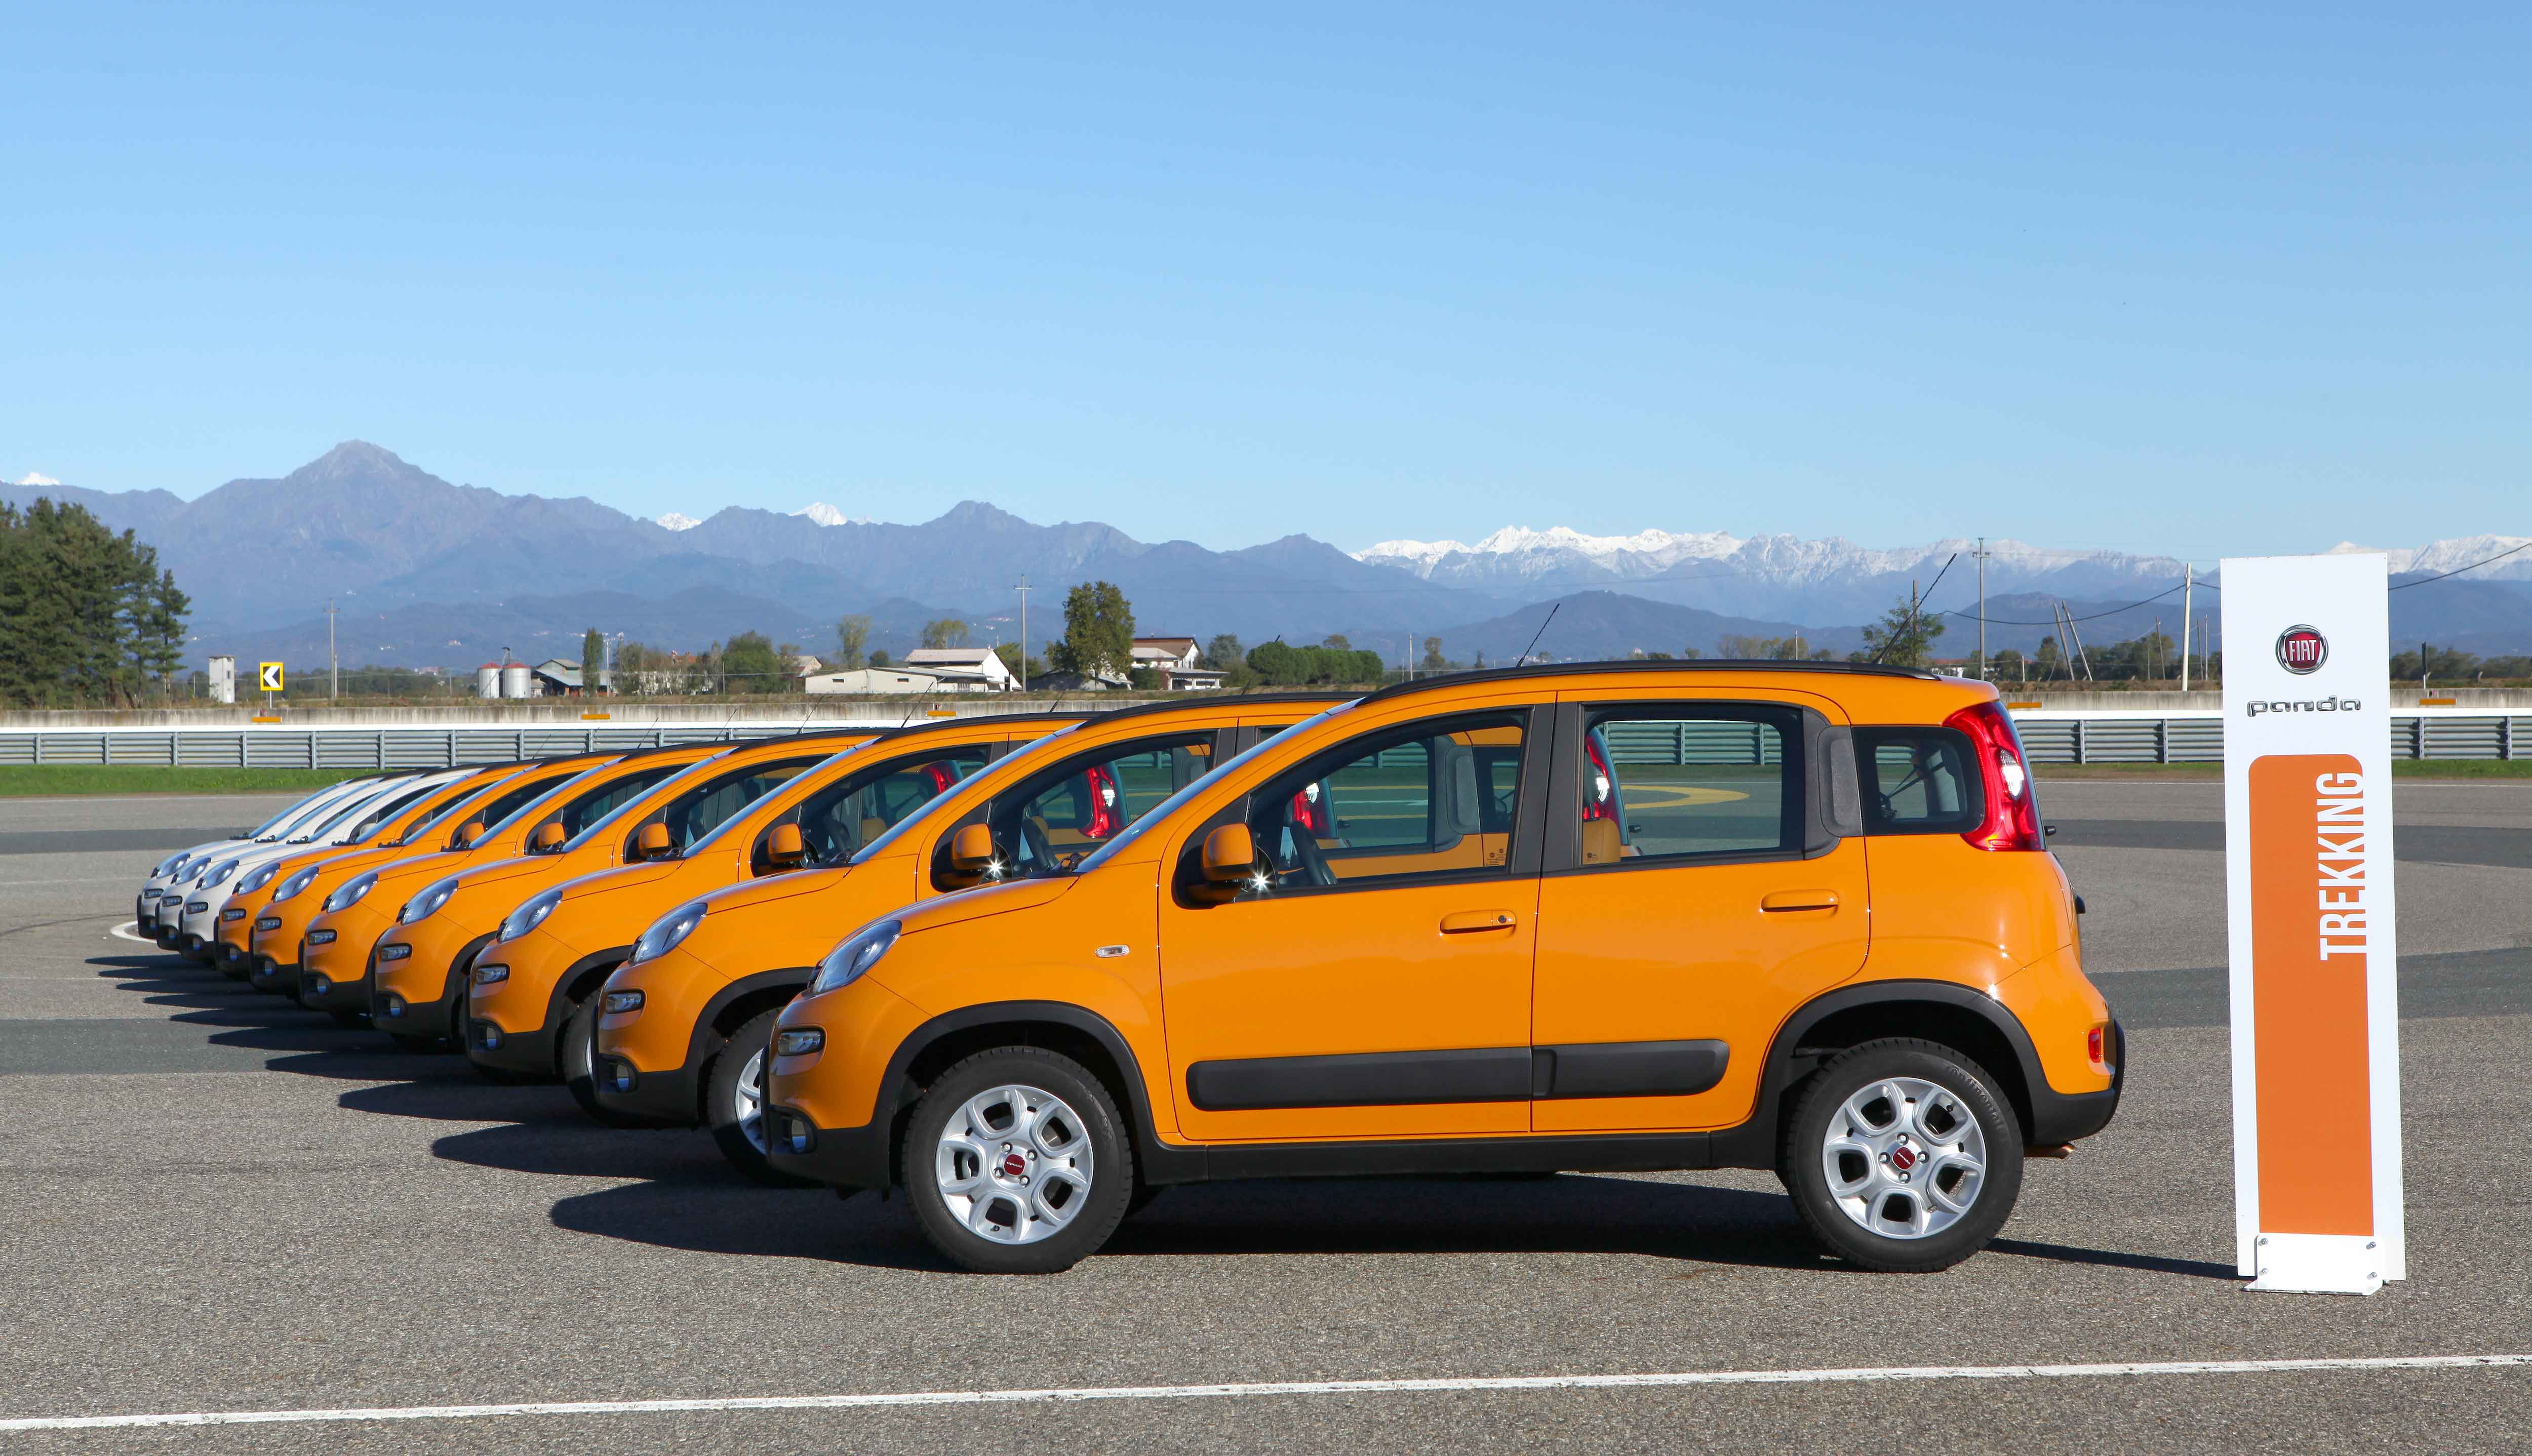 Photos of orange and white Pandas parked on a track 